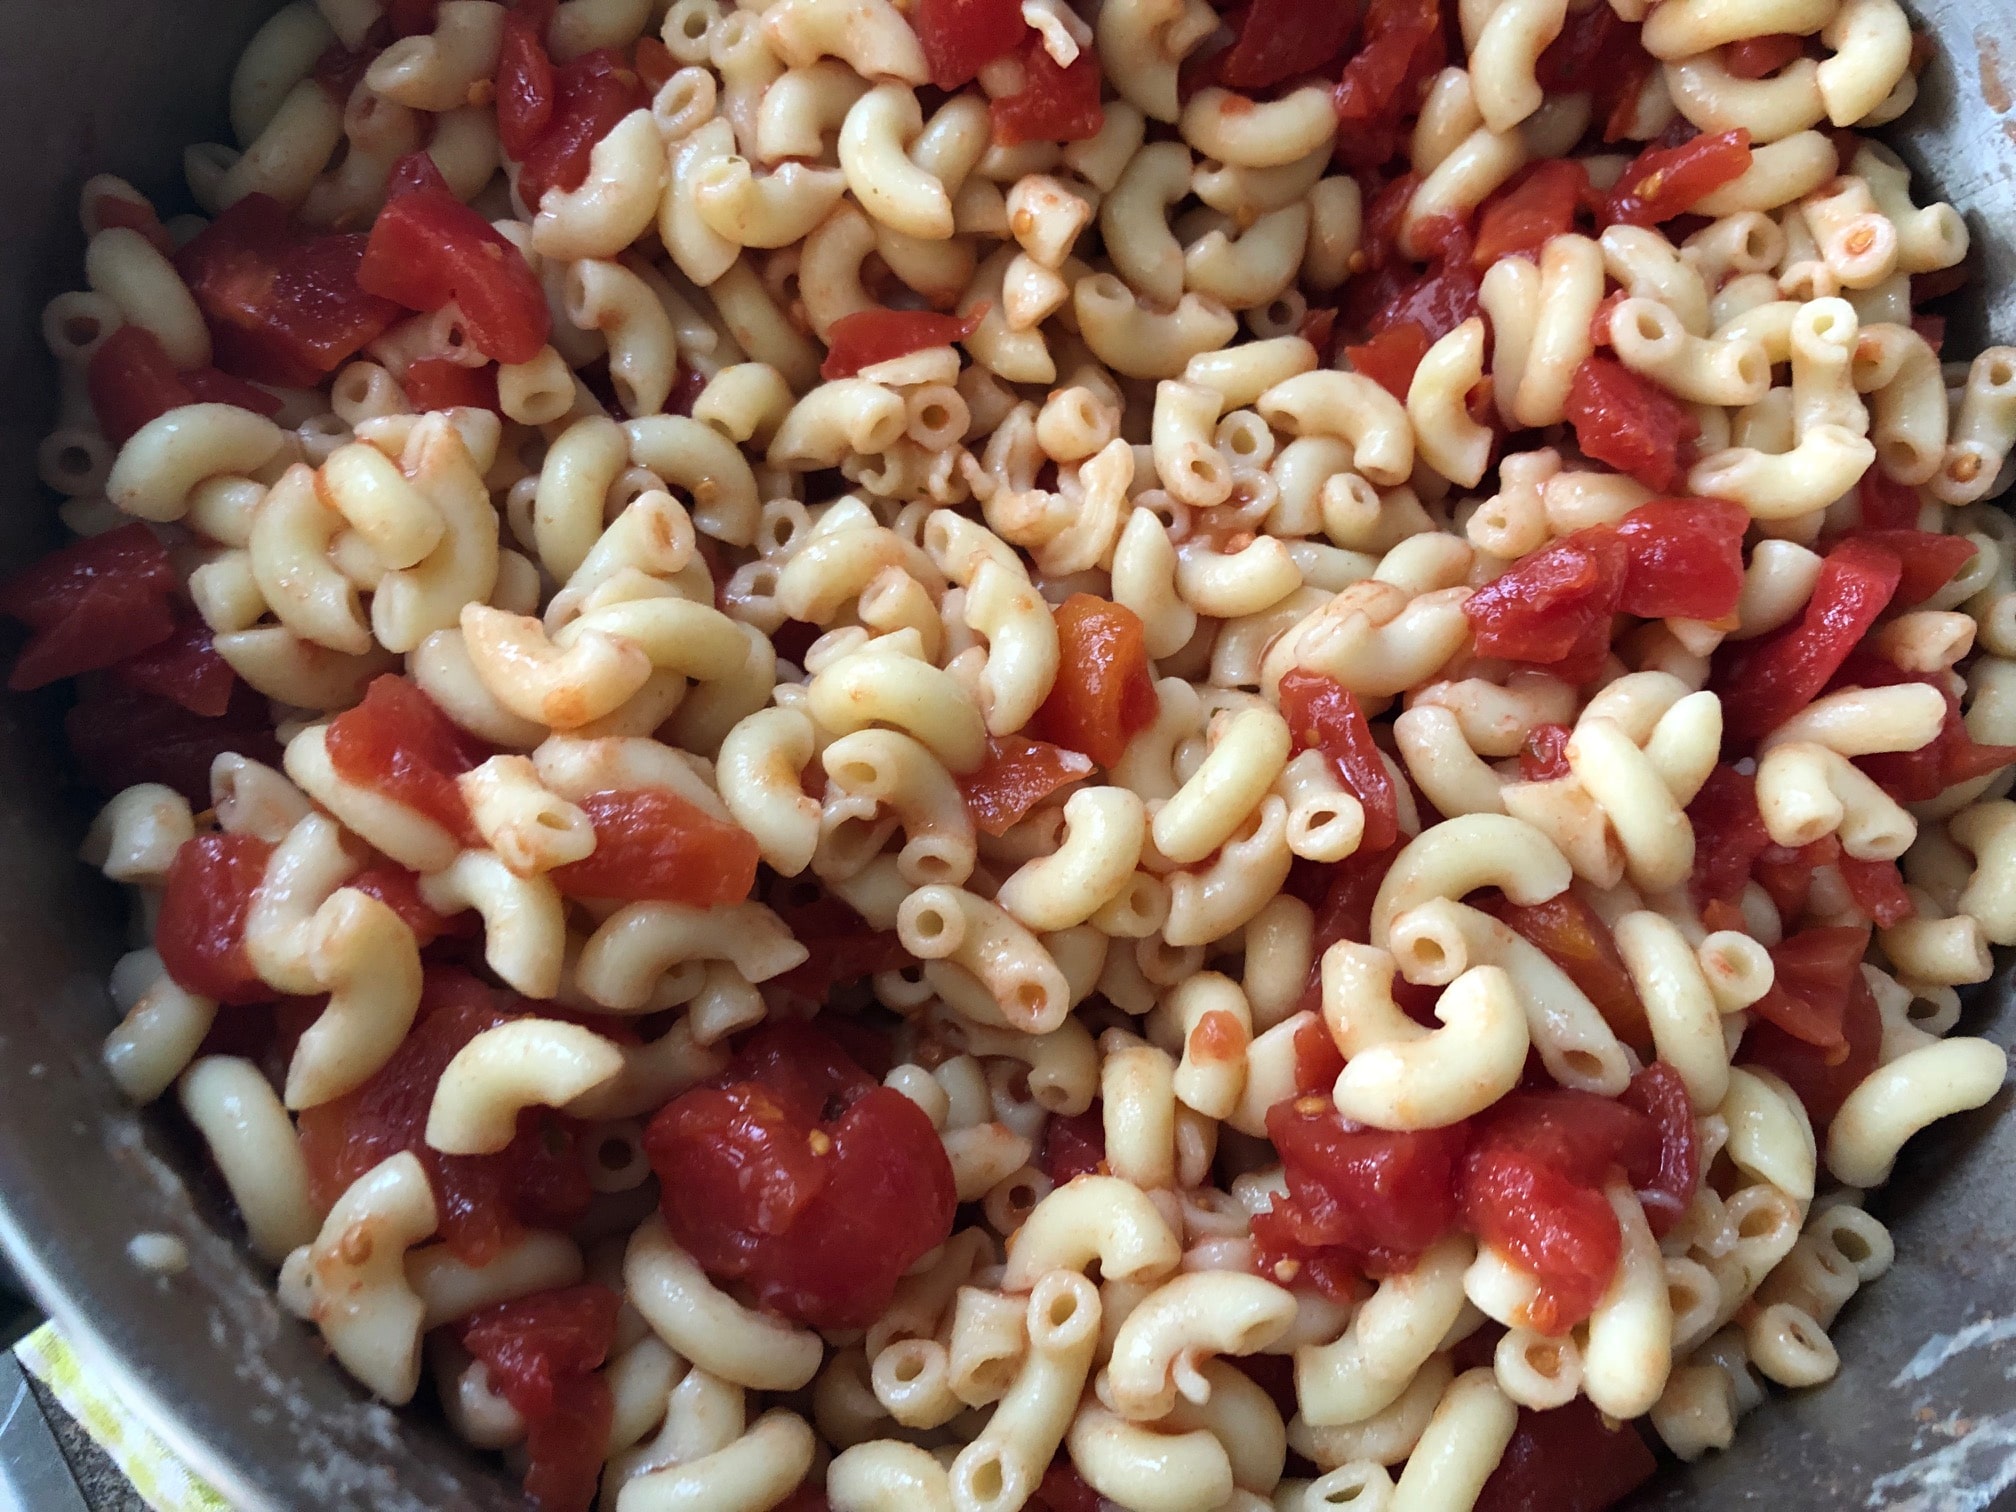 Tomatoes being mixed with macaroni